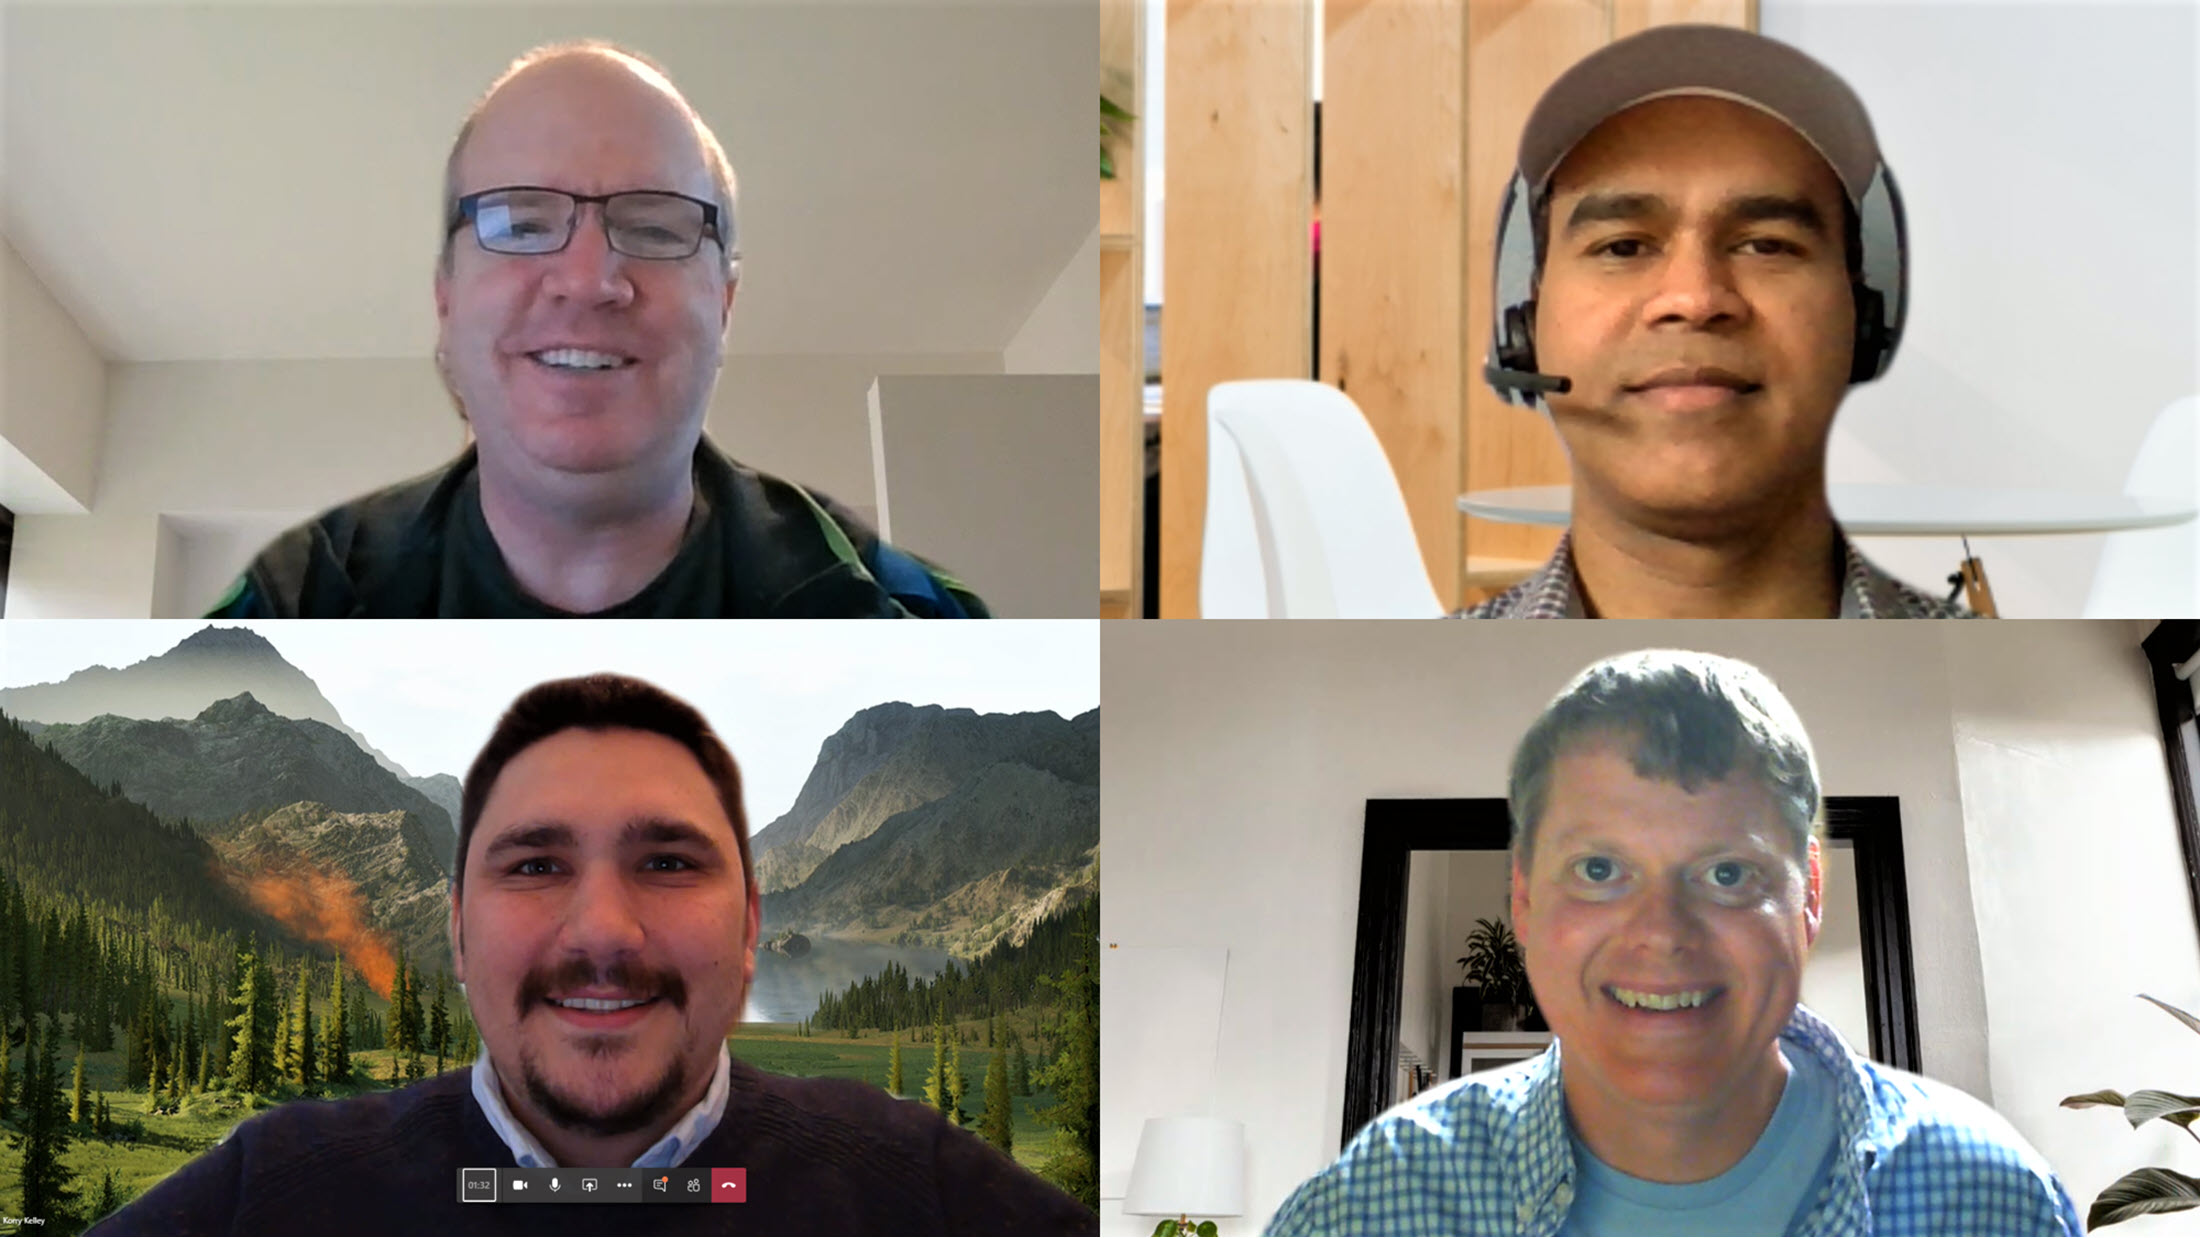 Maw, Surendranath, Kelley, and Busby pose for photos from their home offices via a Microsoft Teams call.